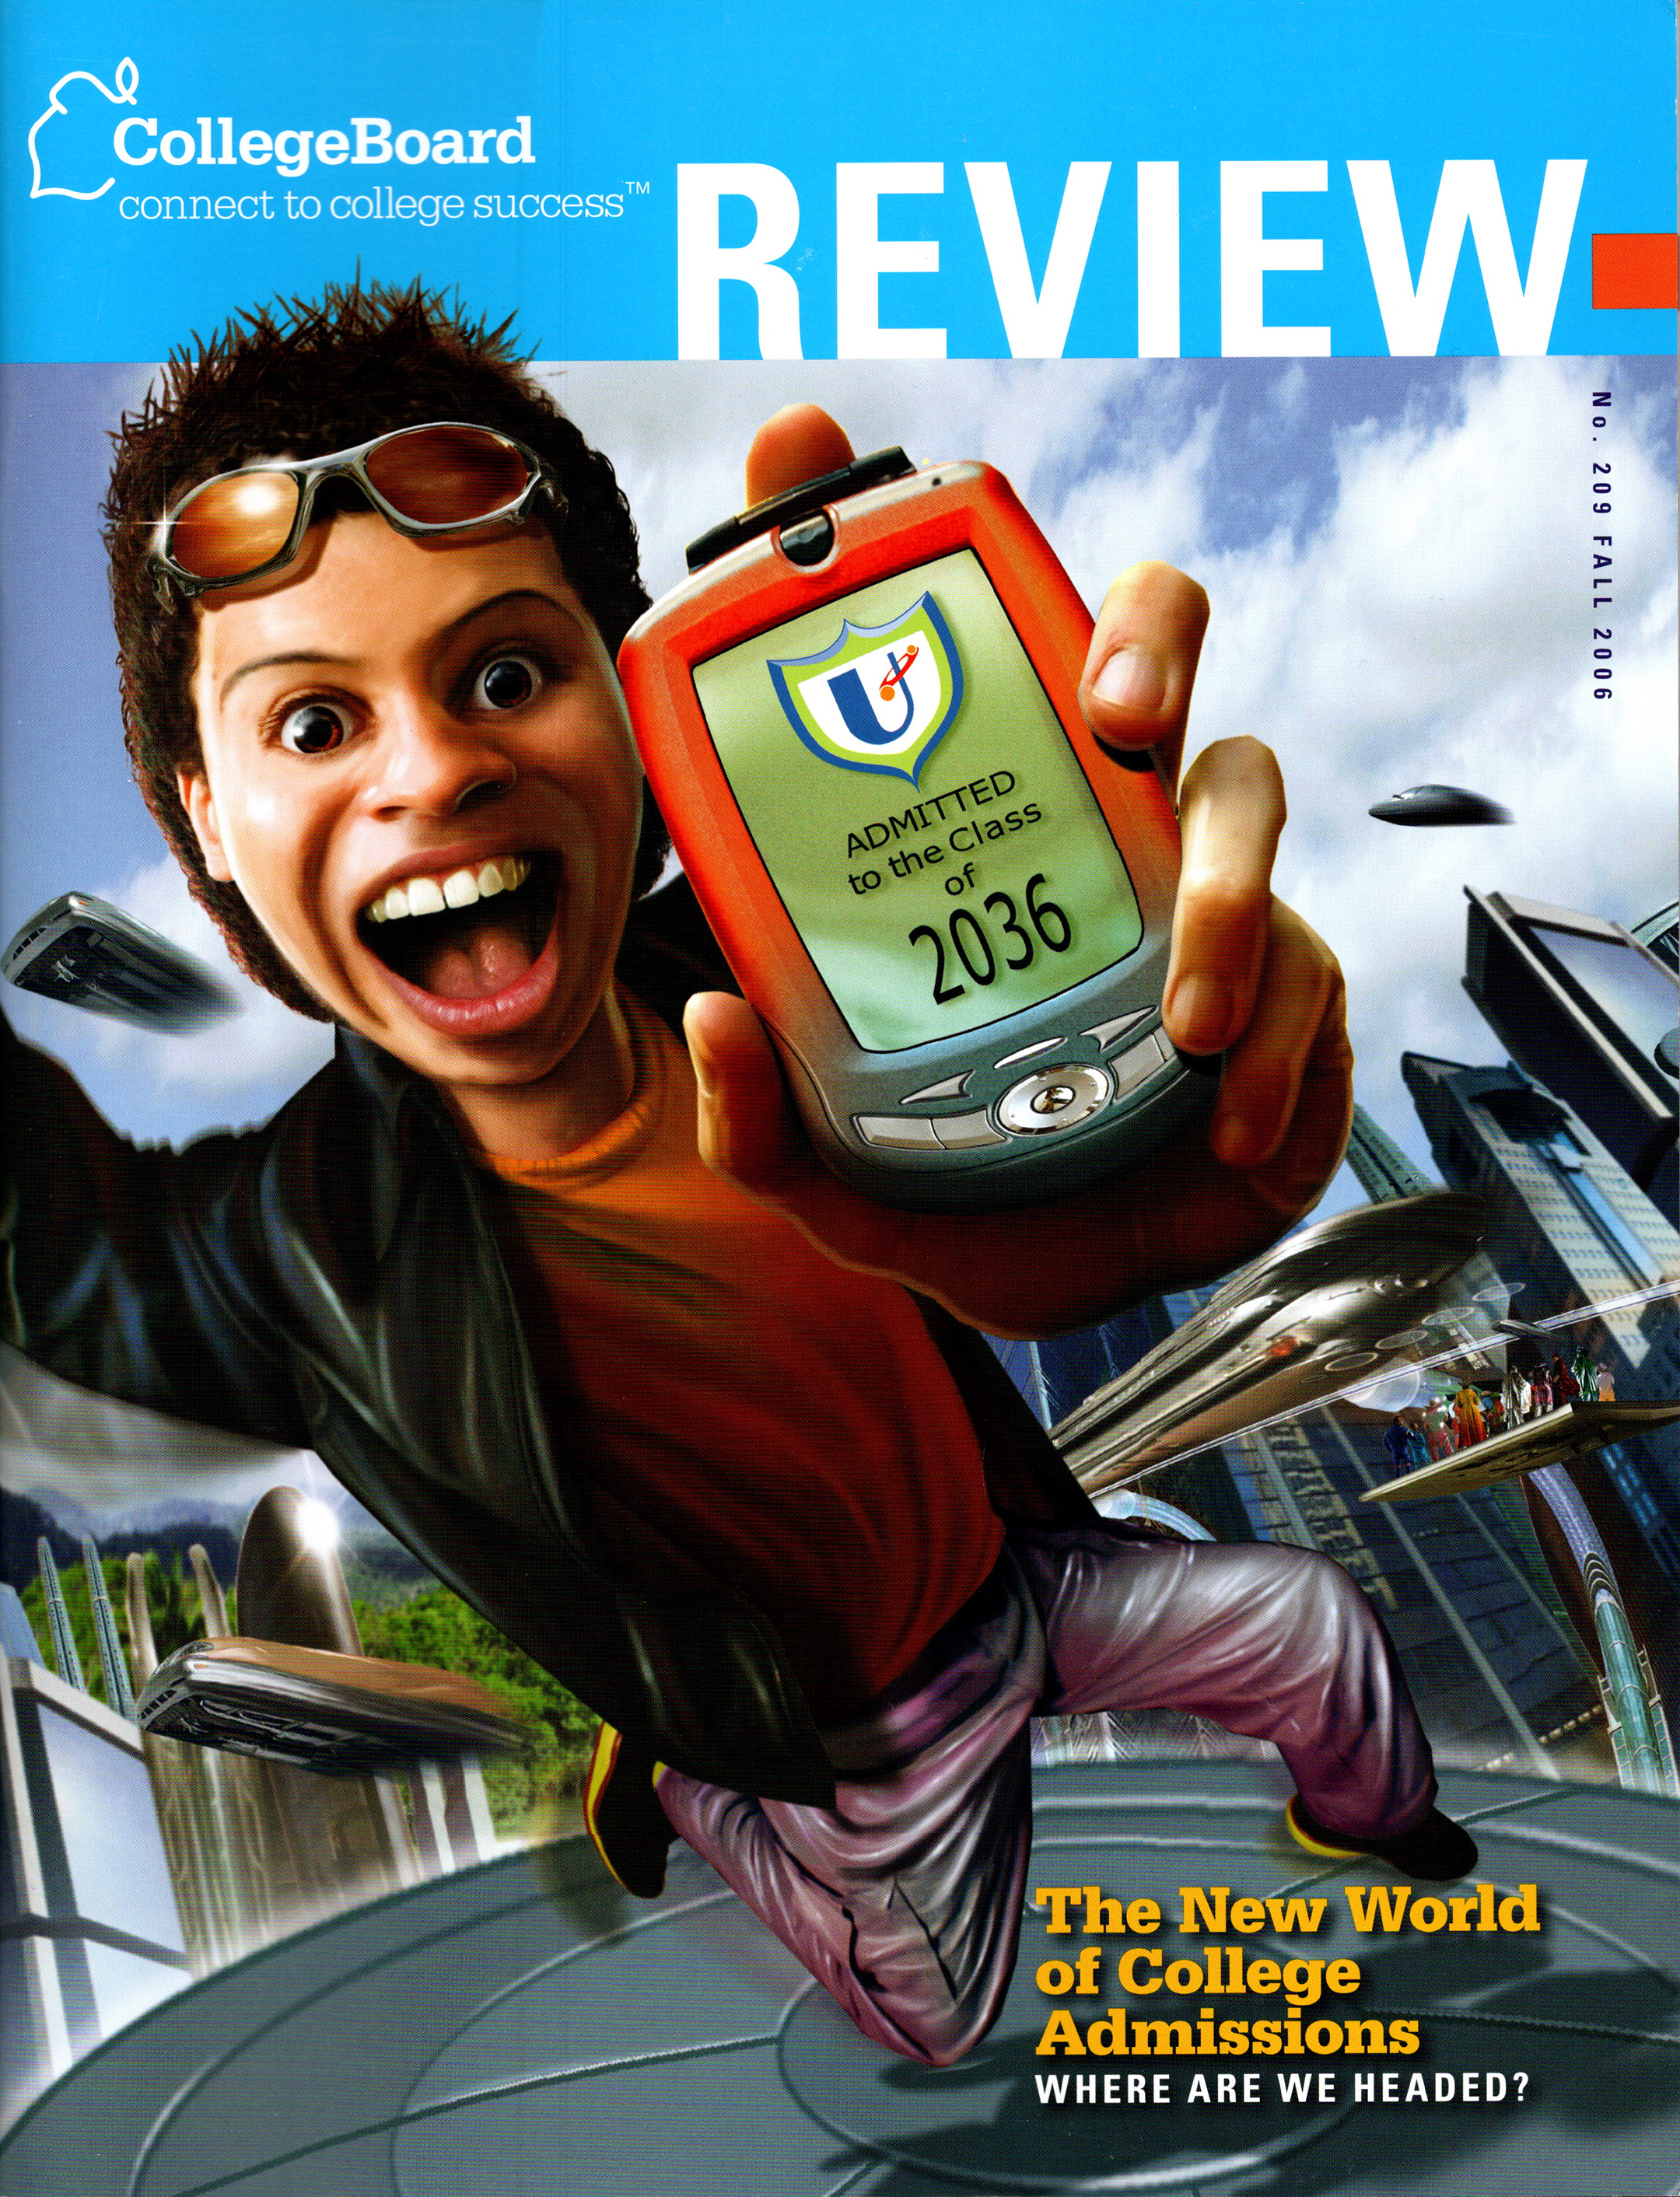 Cover of the fall 2006 issue of the College Board Review